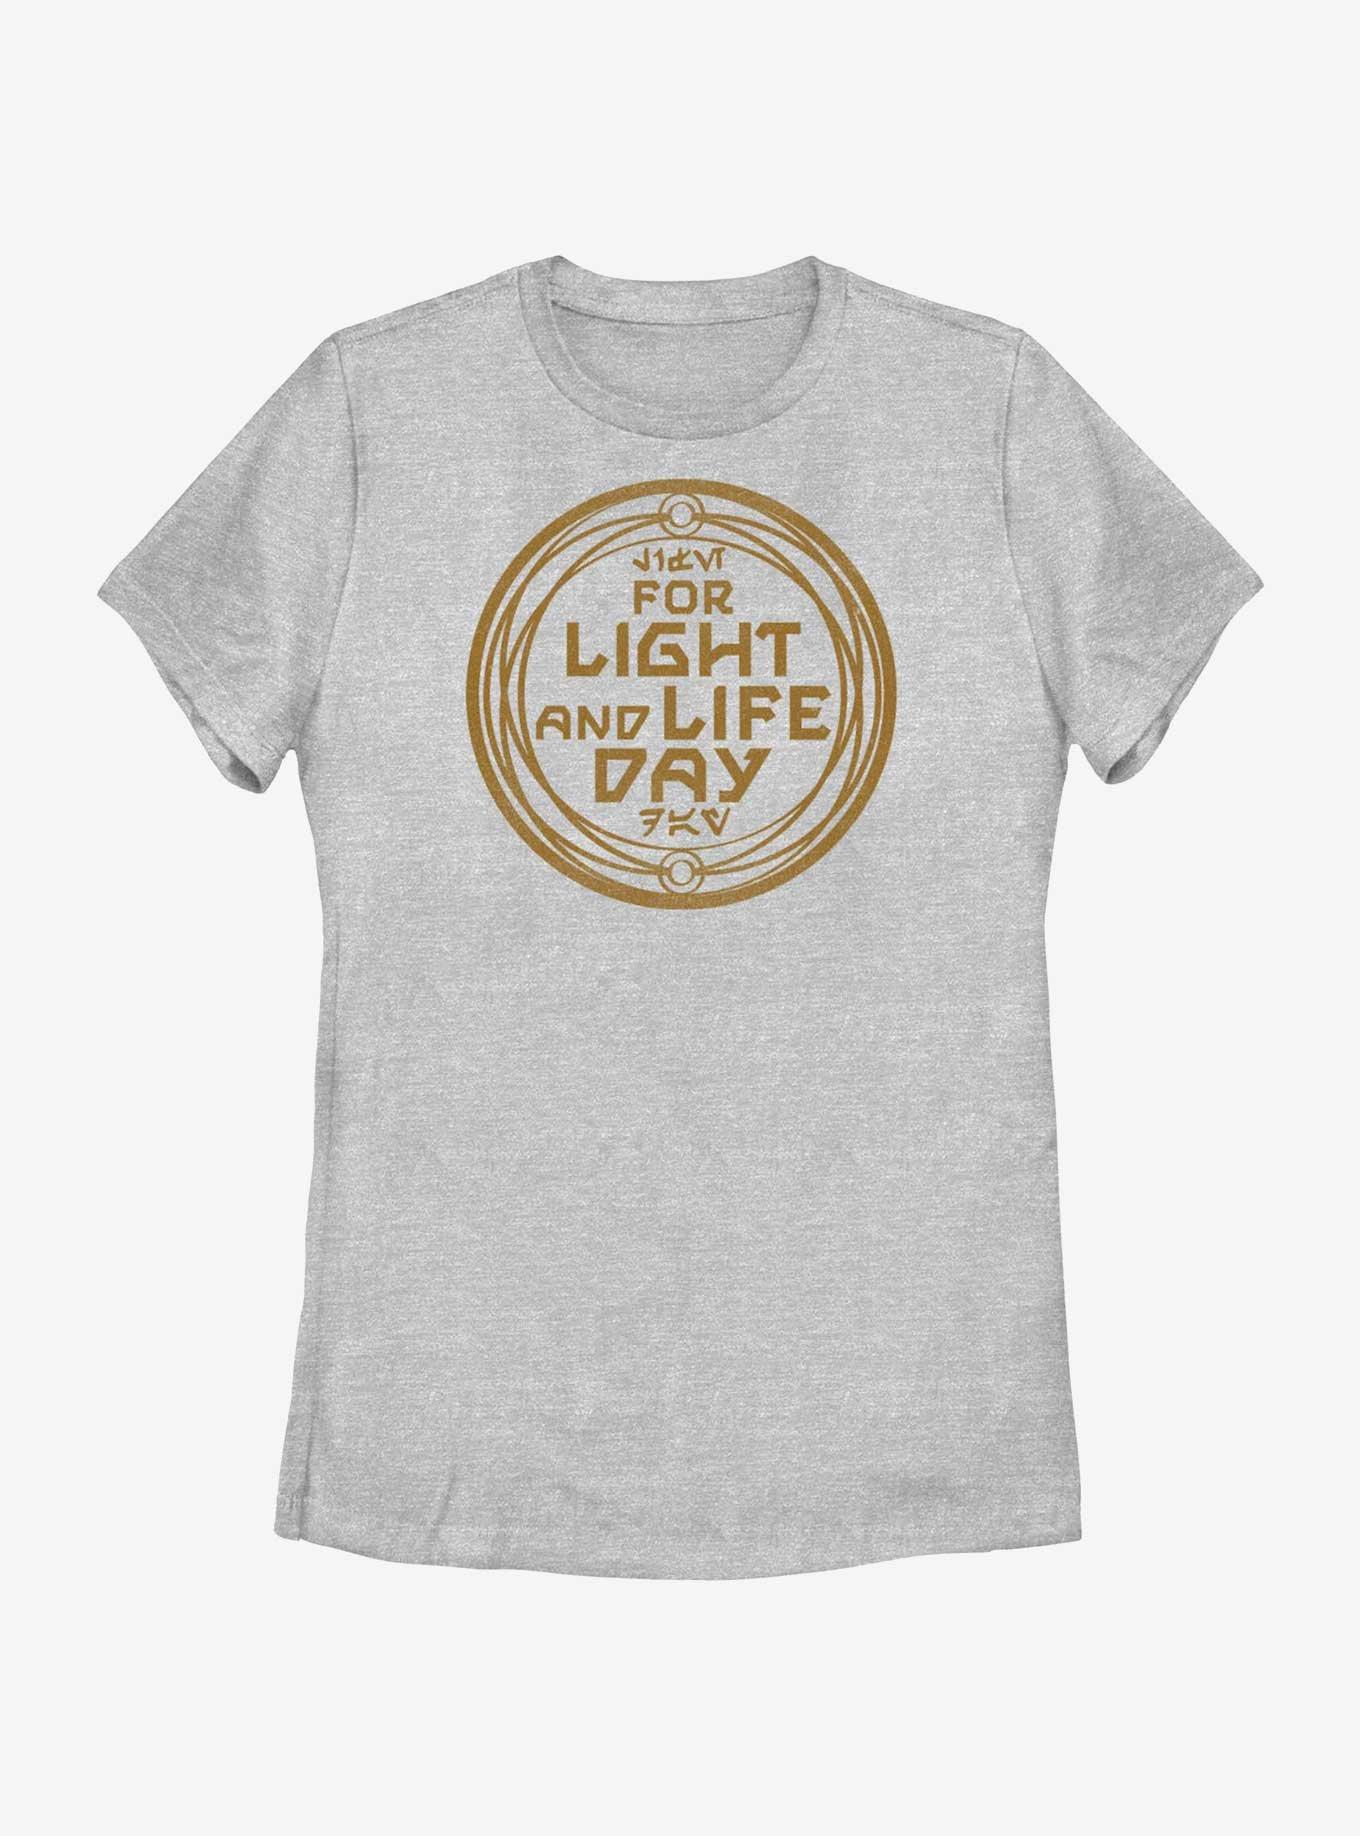 Star Wars For Light And Life Day Badge Womens T-Shirt, , hi-res